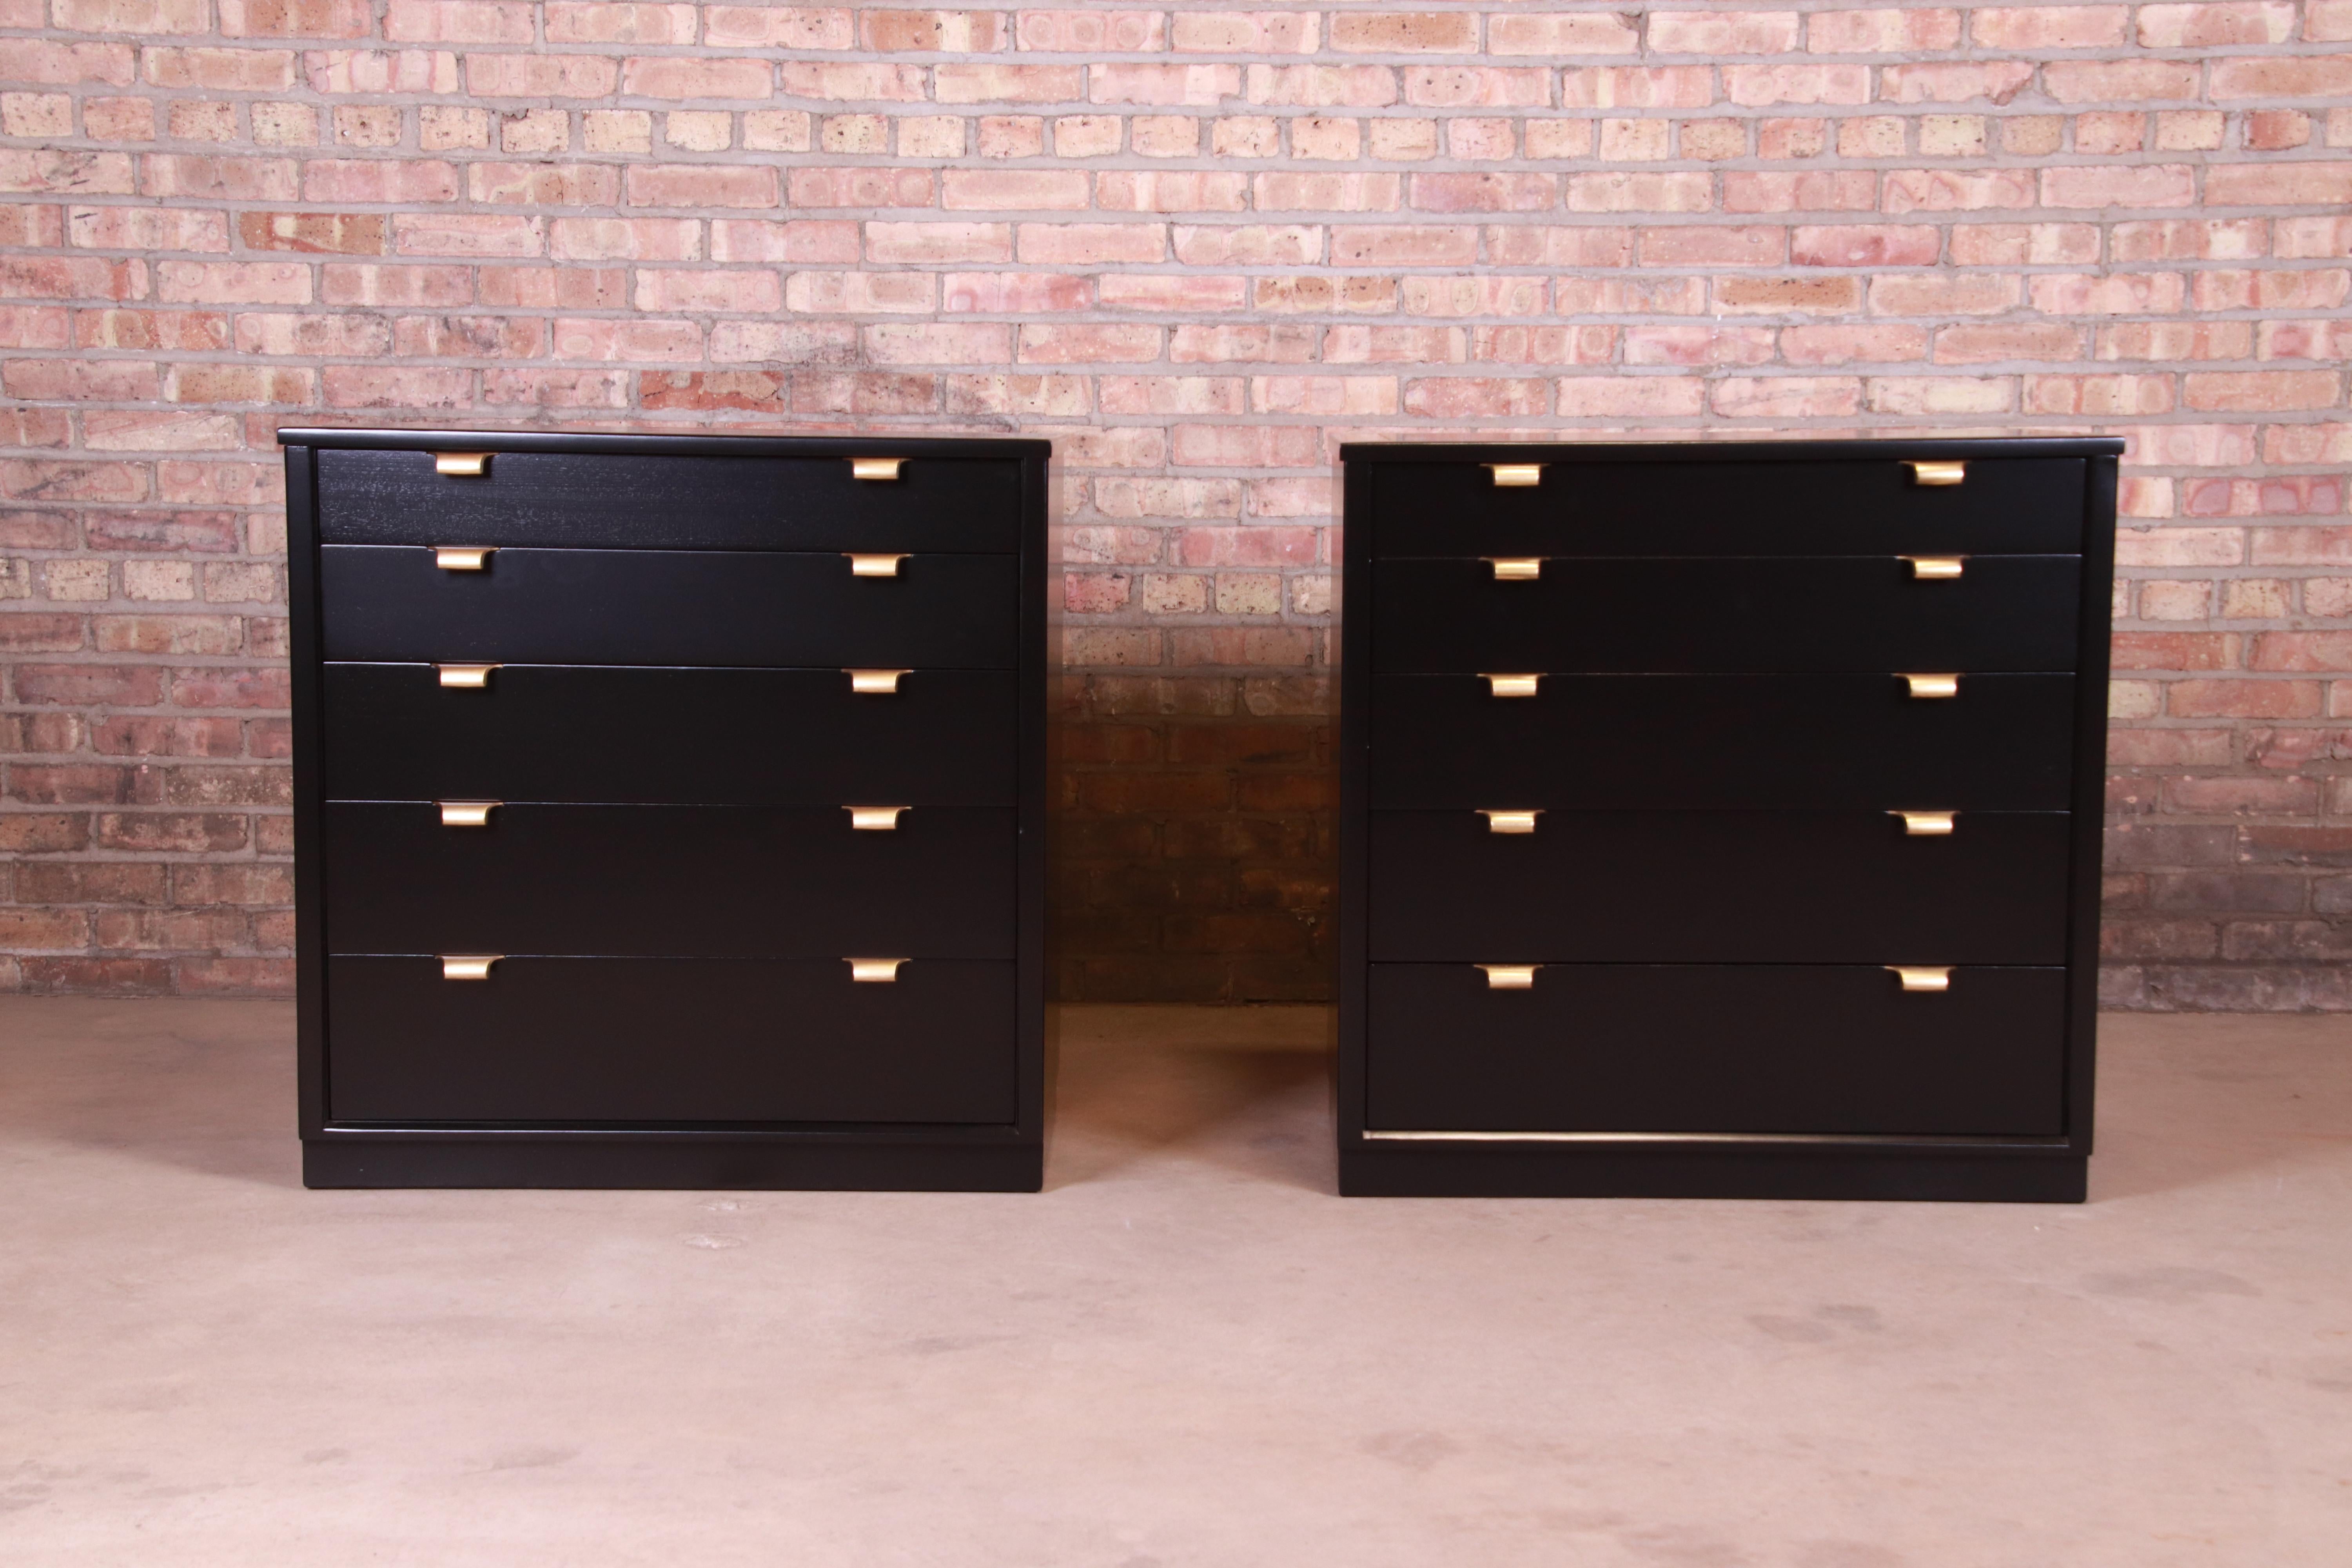 An exceptional pair of Mid-Century Modern five-drawer bachelor chests or large bedside chests

By Edward Wormley for Drexel 